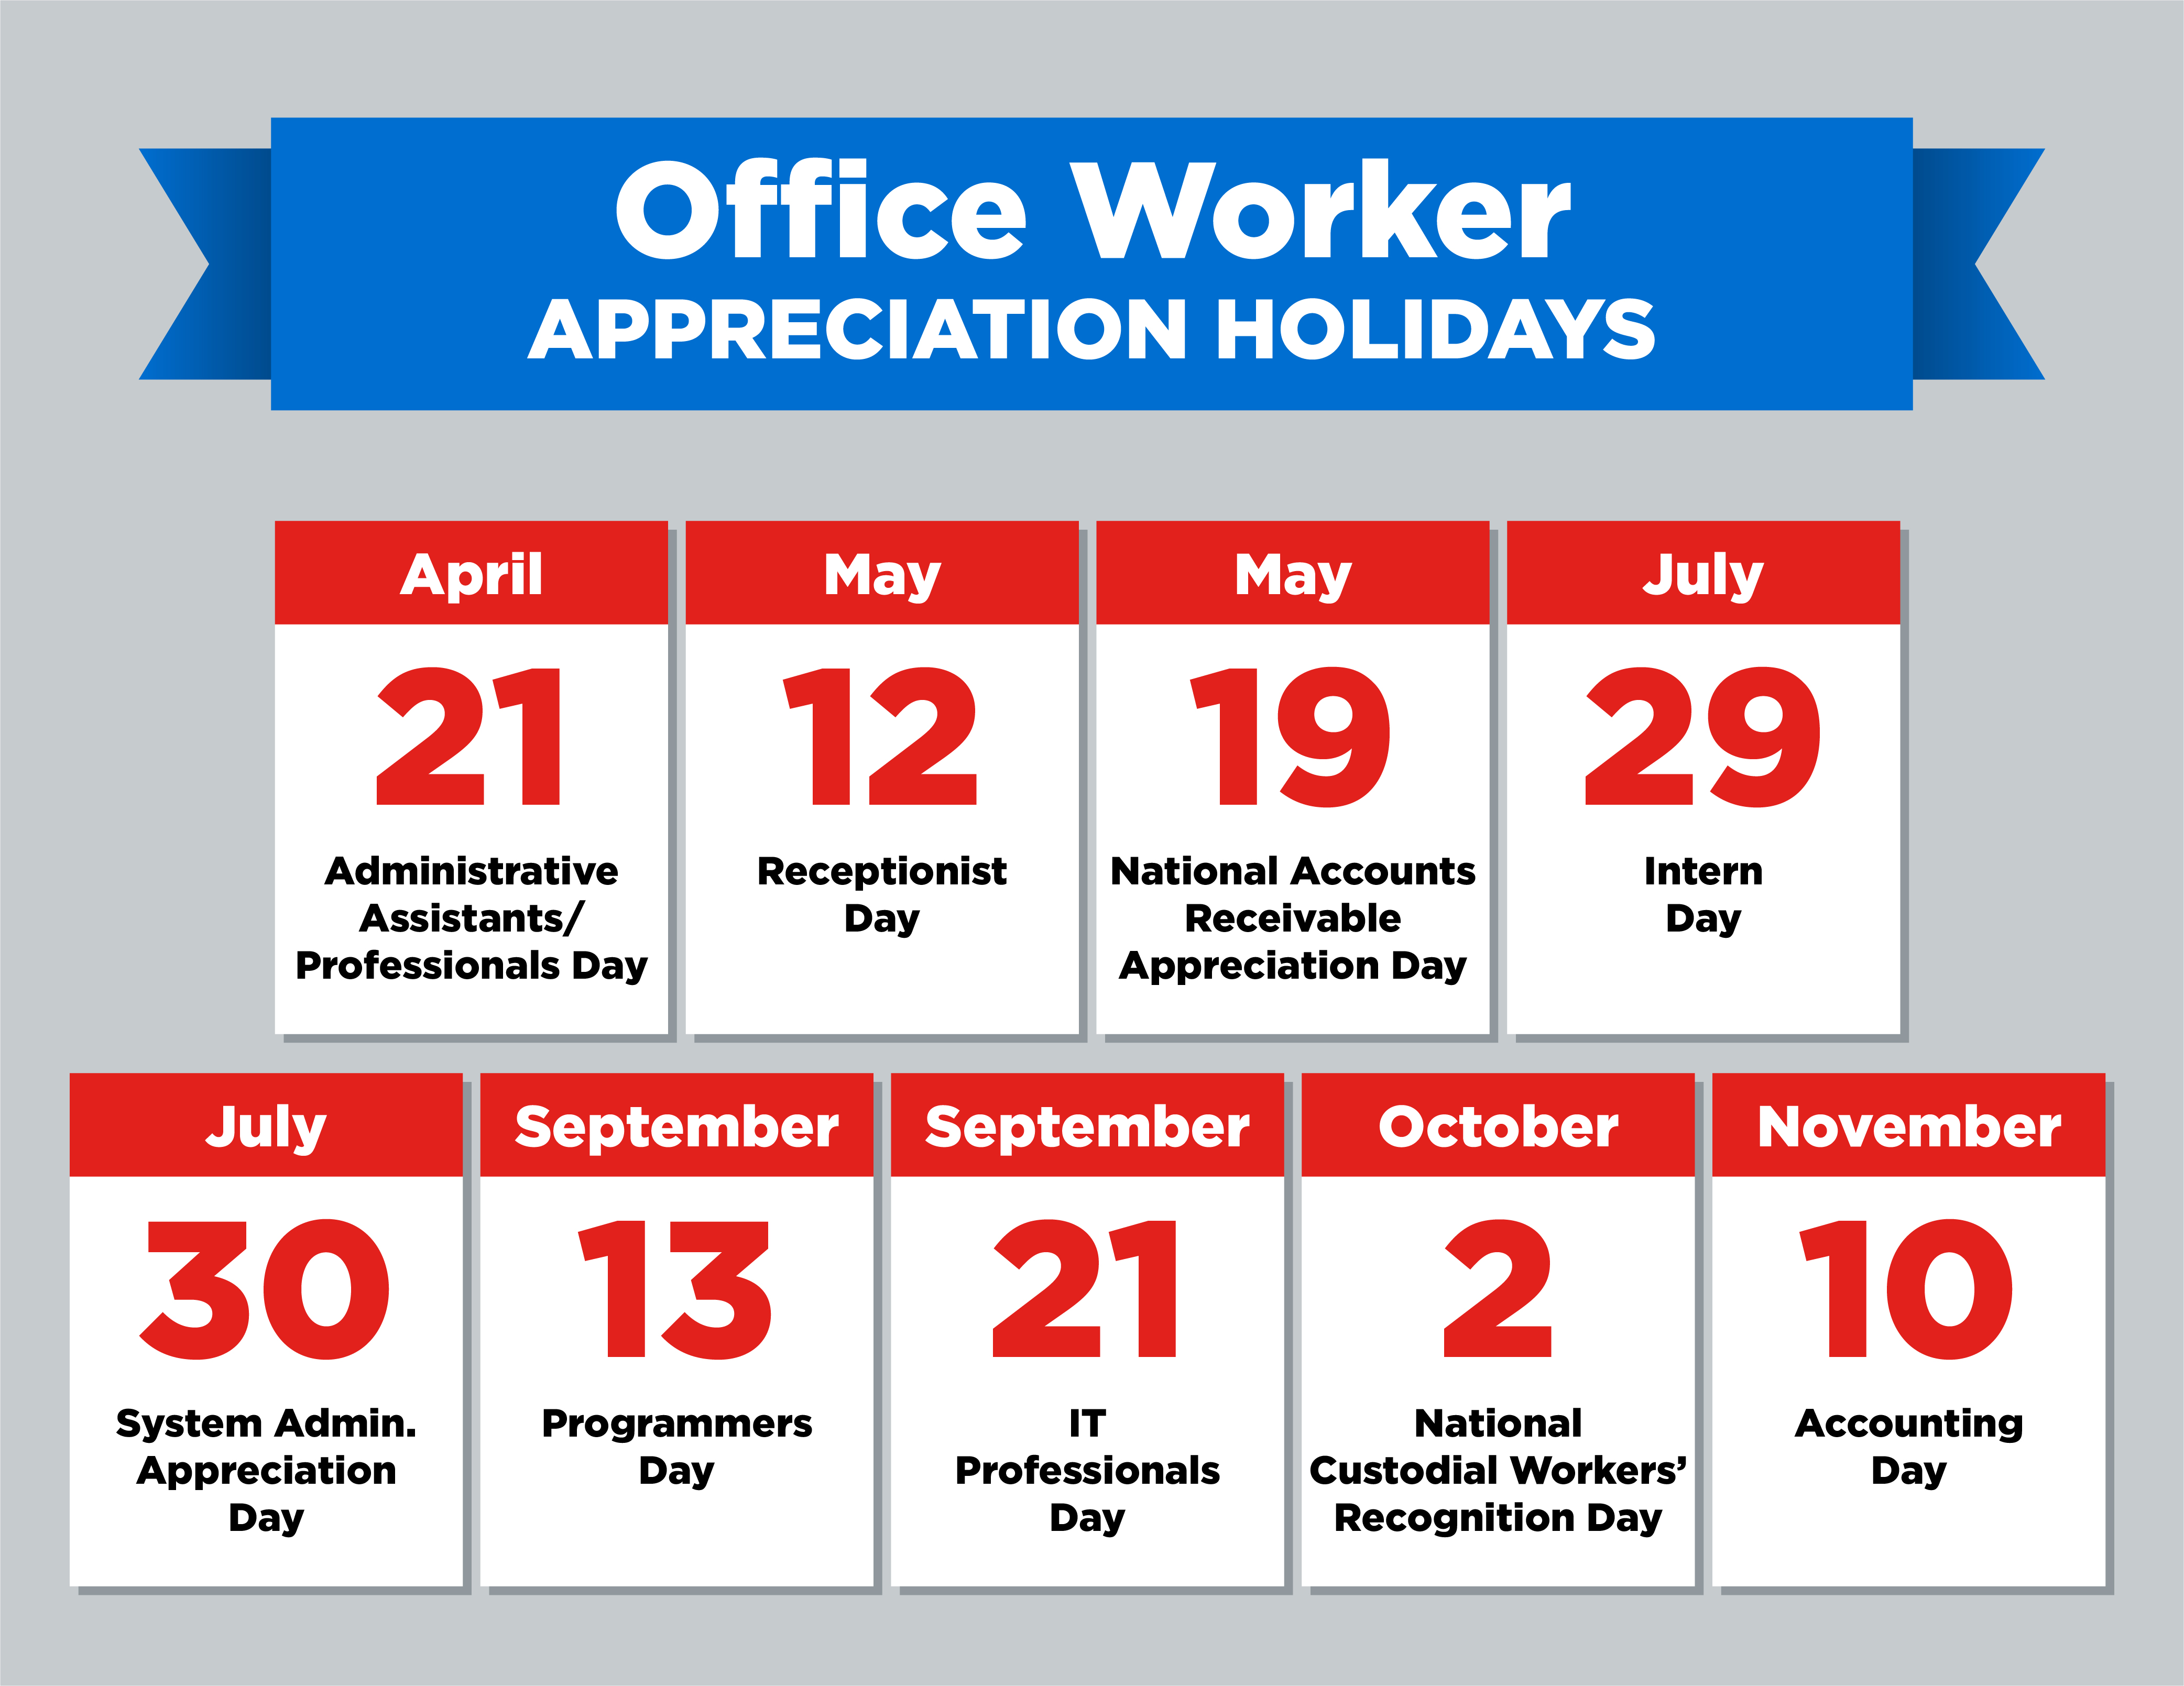 Appreciation holidays calendar for office workers